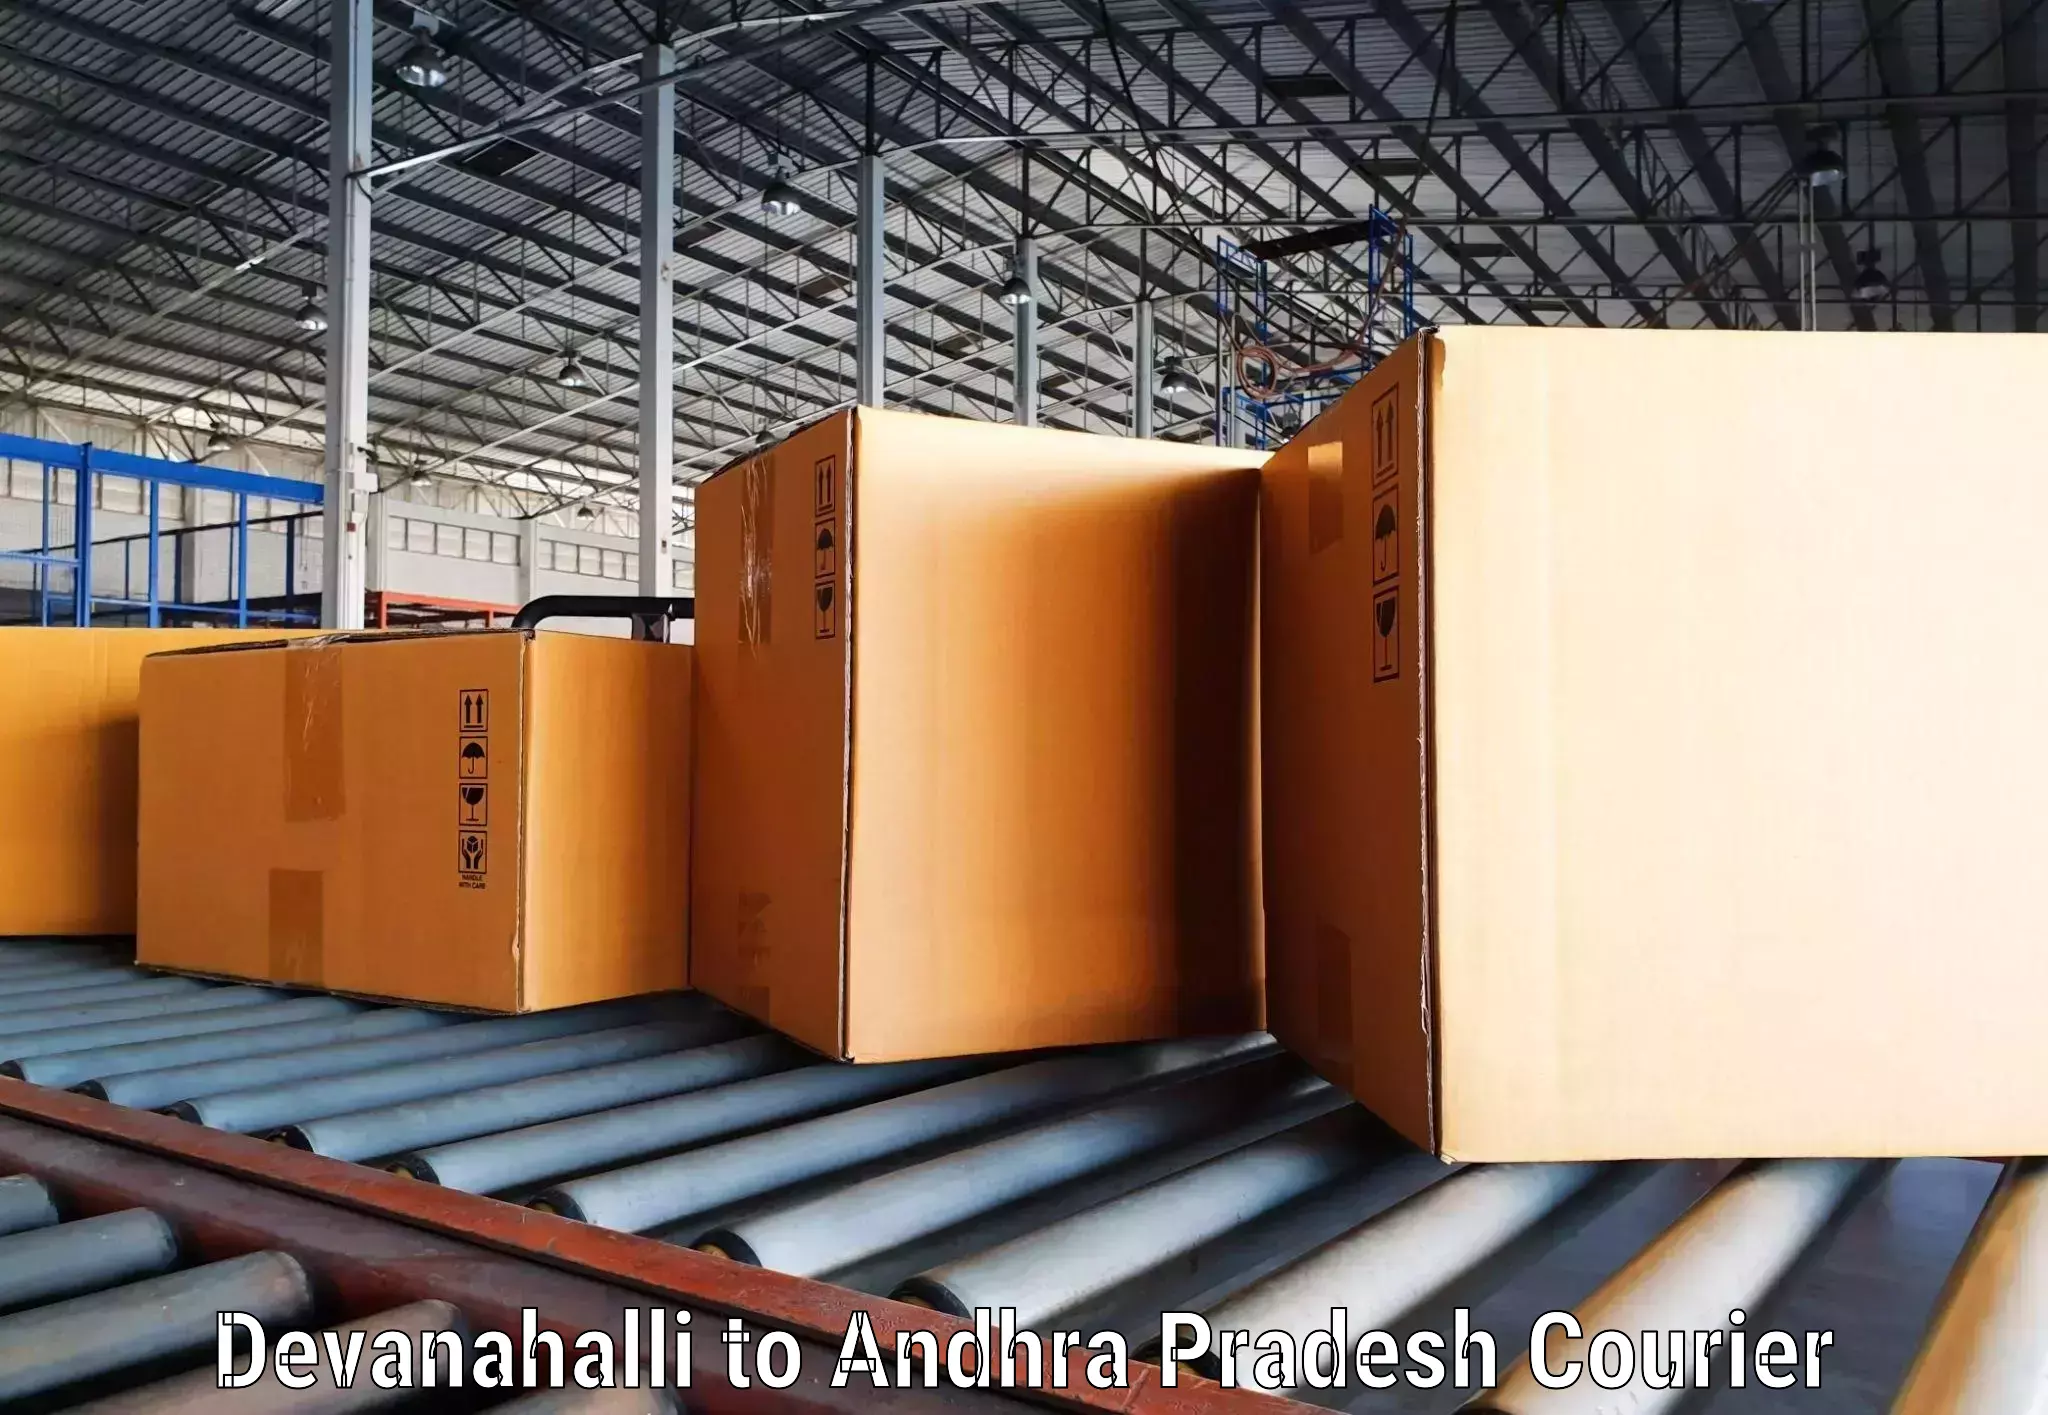 Customizable shipping options in Devanahalli to Sirvella